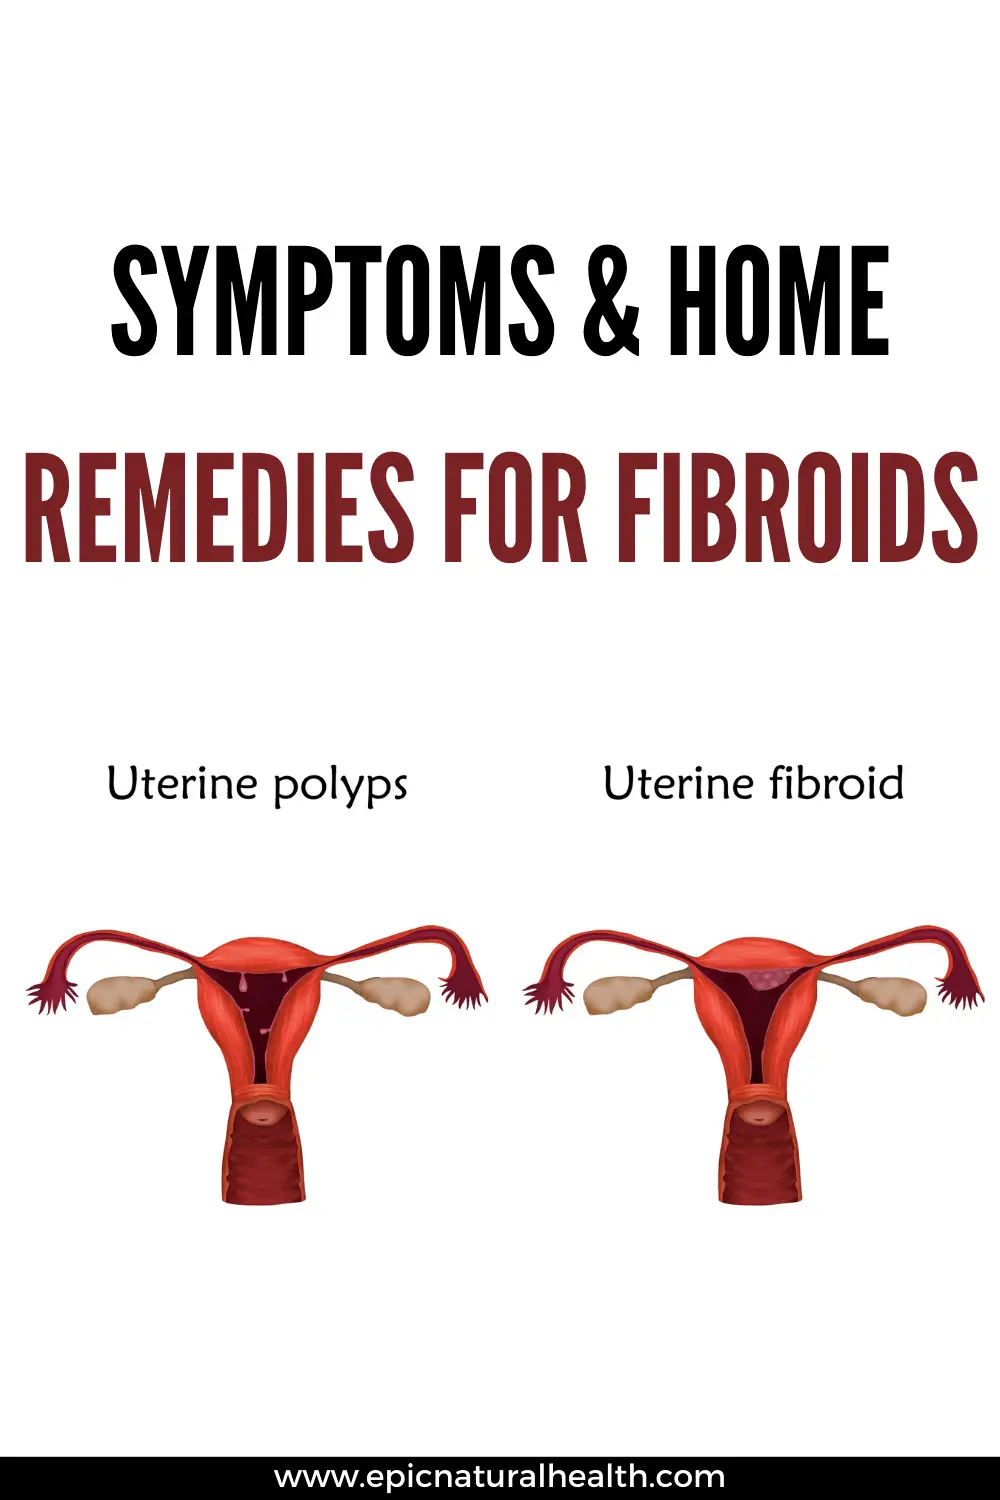 Symptoms and home remedies for fibroids